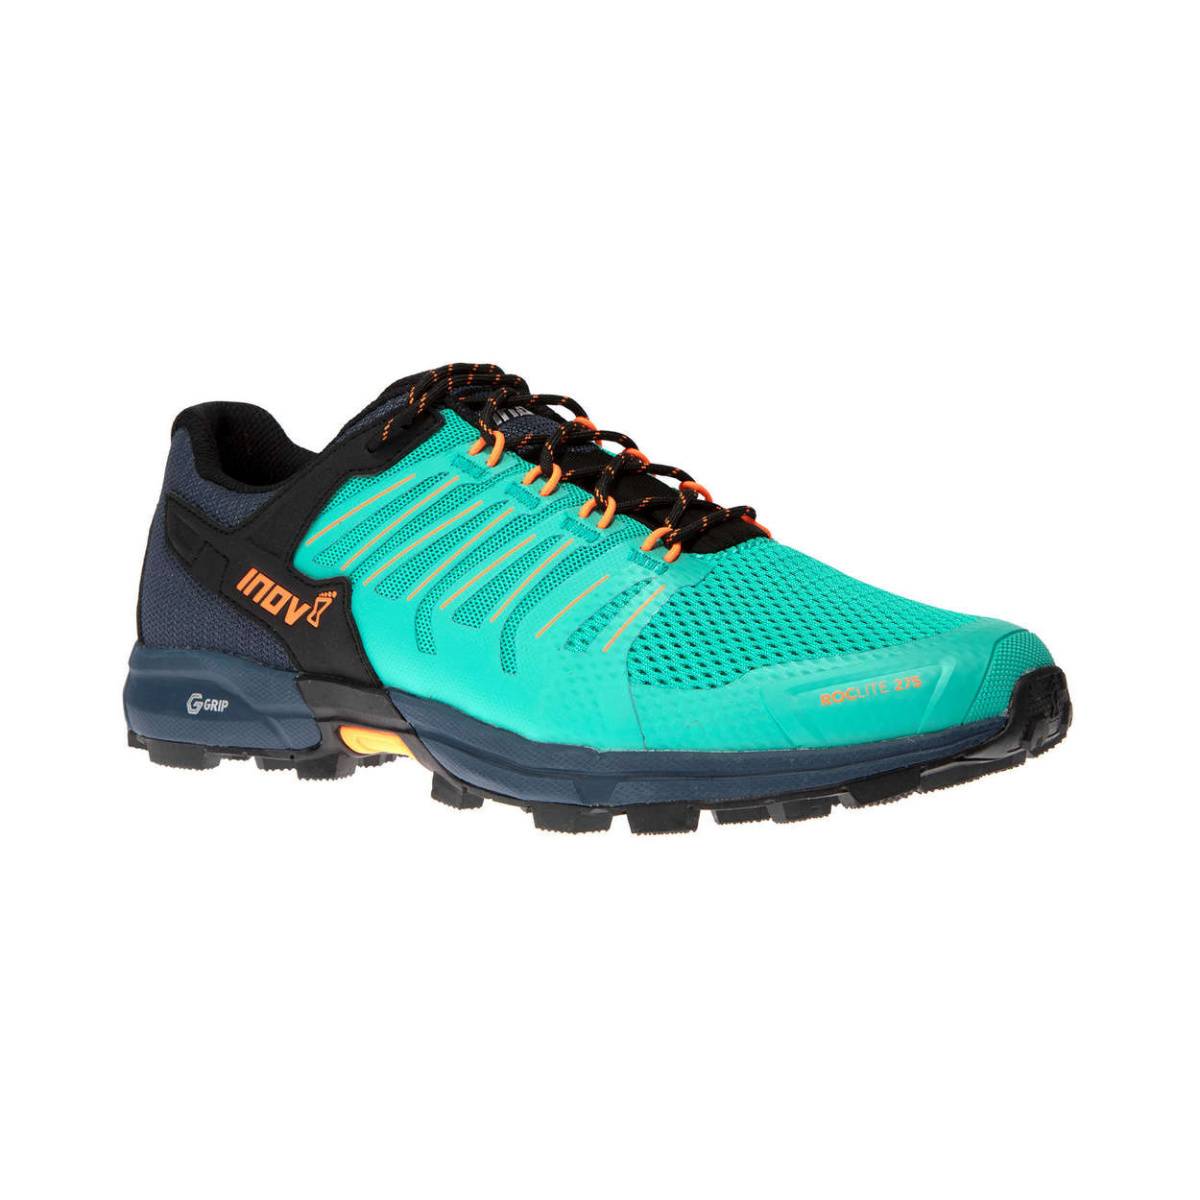 inov 8 womens Roclite G 275 teal trail running shoe Fast and Light CH 006